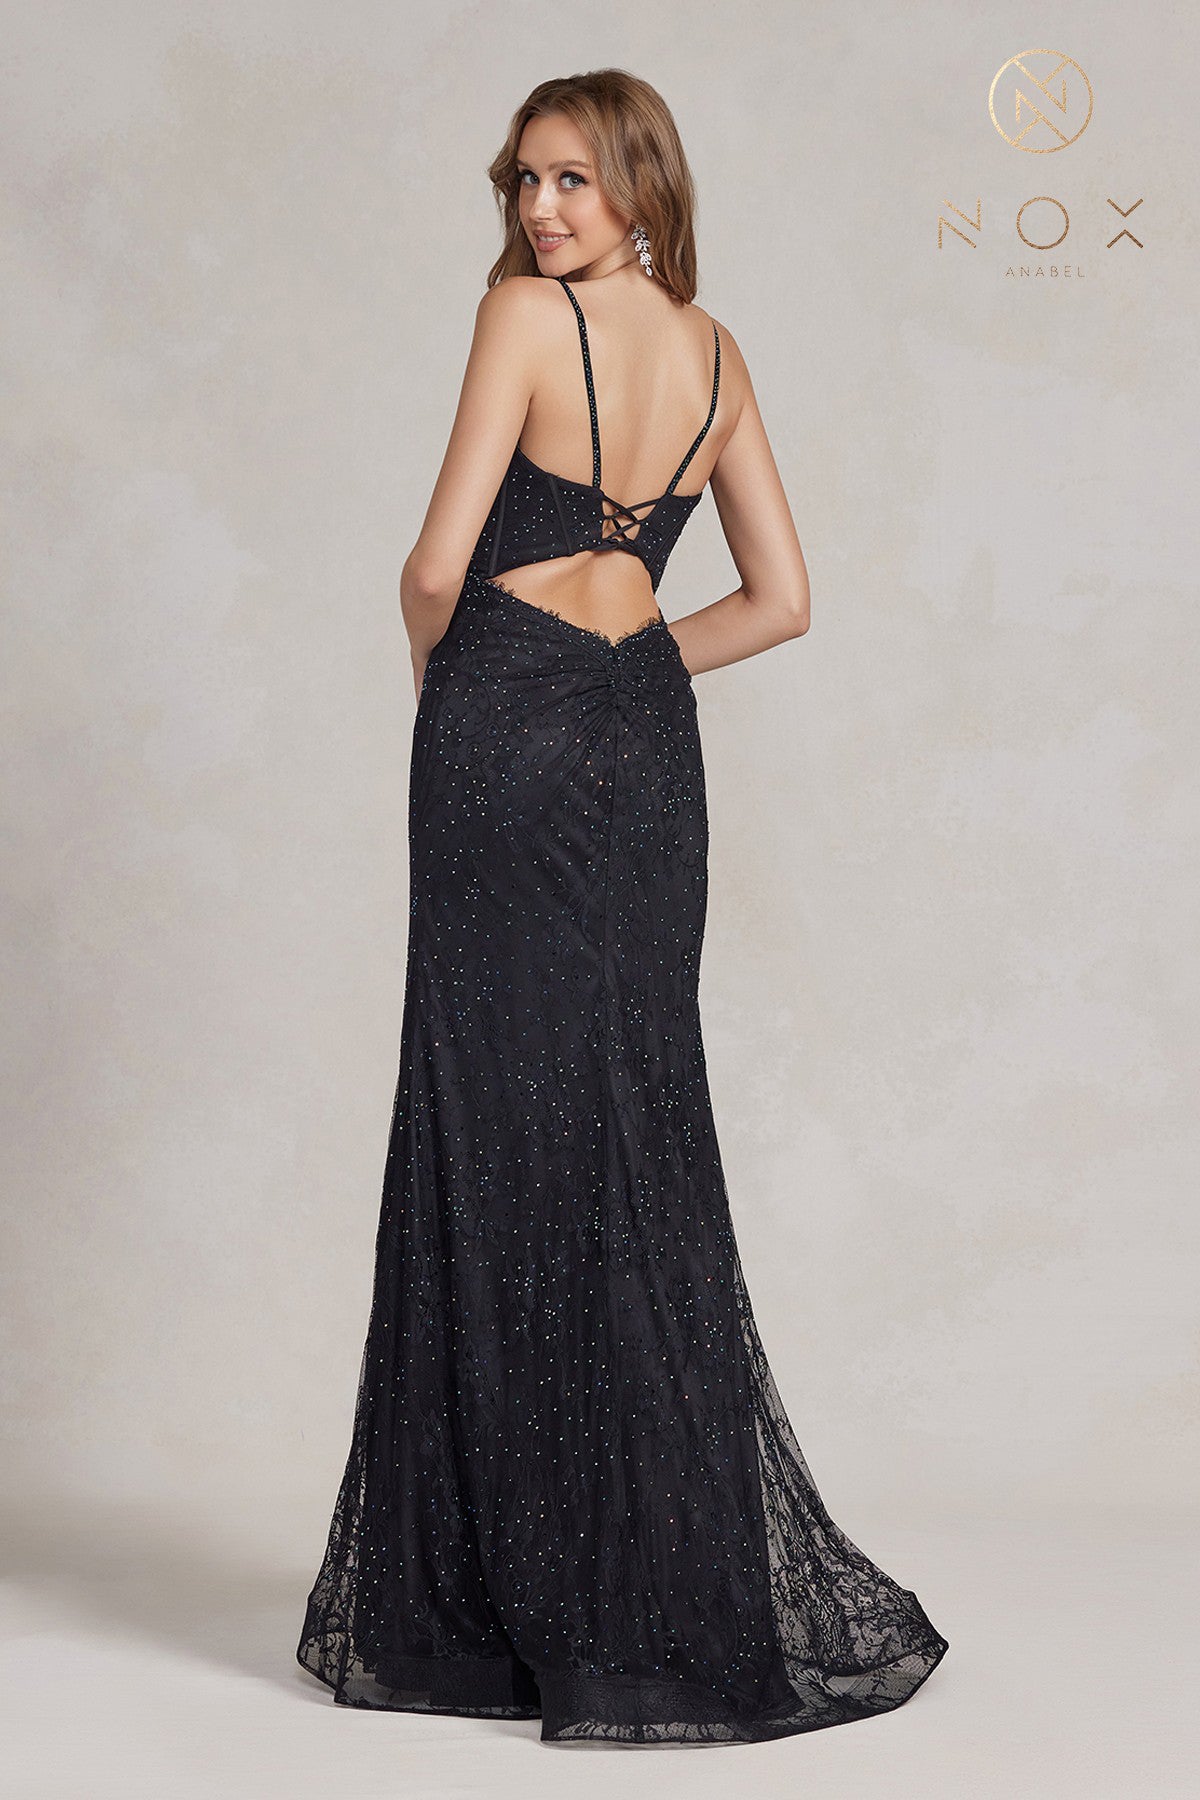 Nox Anabel B1145 Long Fitted Lace backless Corset Prom Dress Slit Embellished Gown  Sizes: 00-16  Colors: Black, Navy Blue